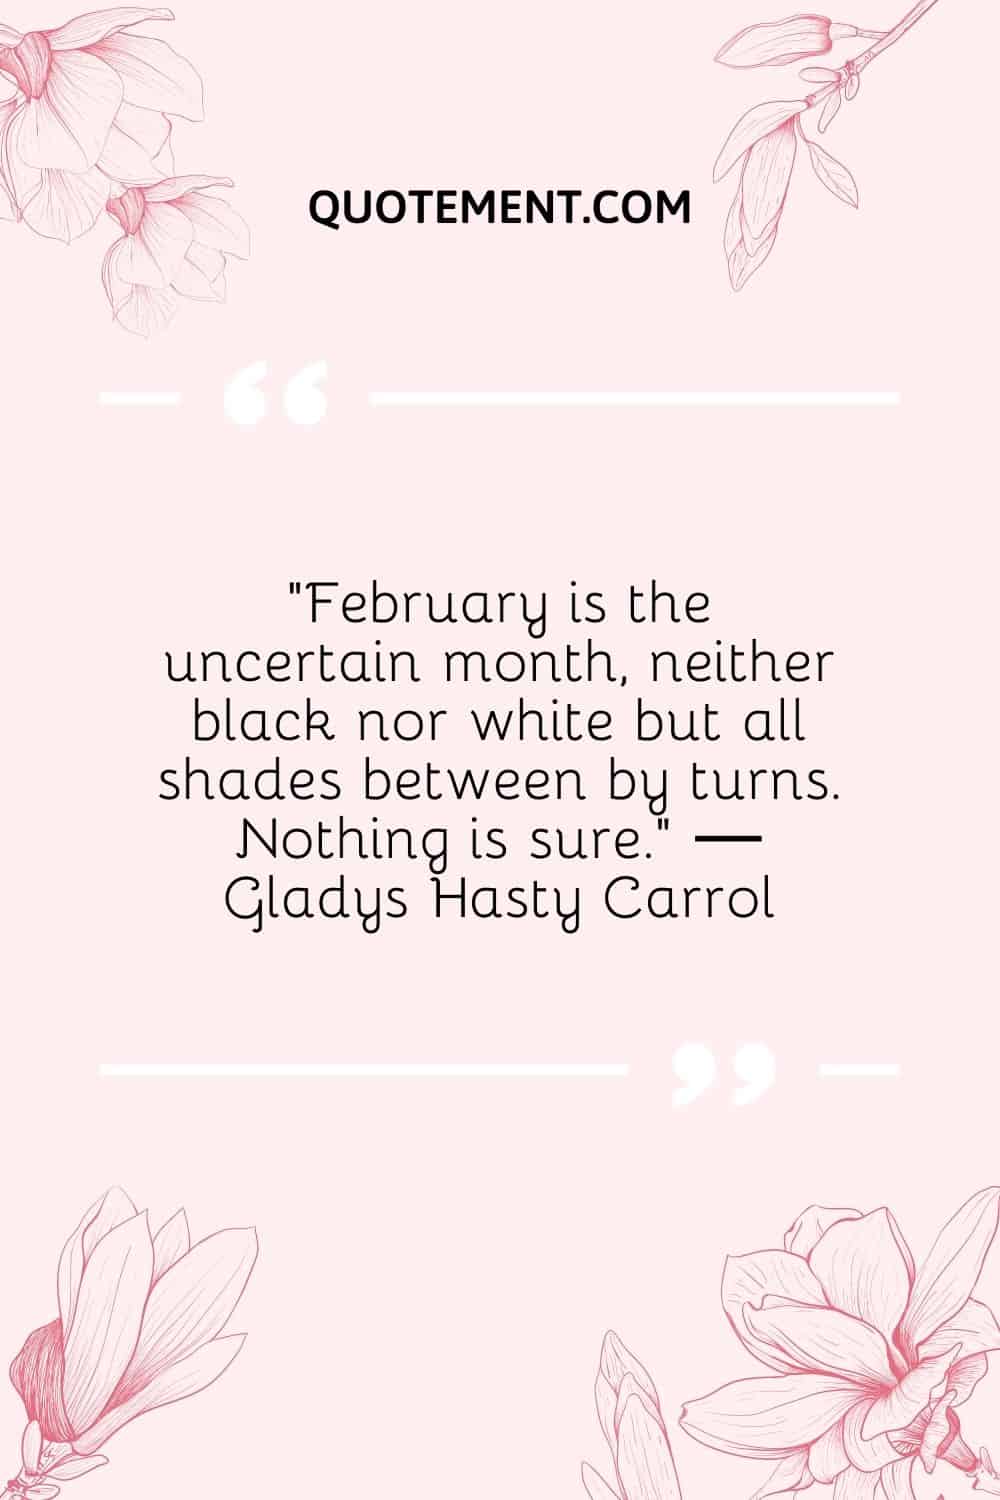 illustration of flowers representing february quote